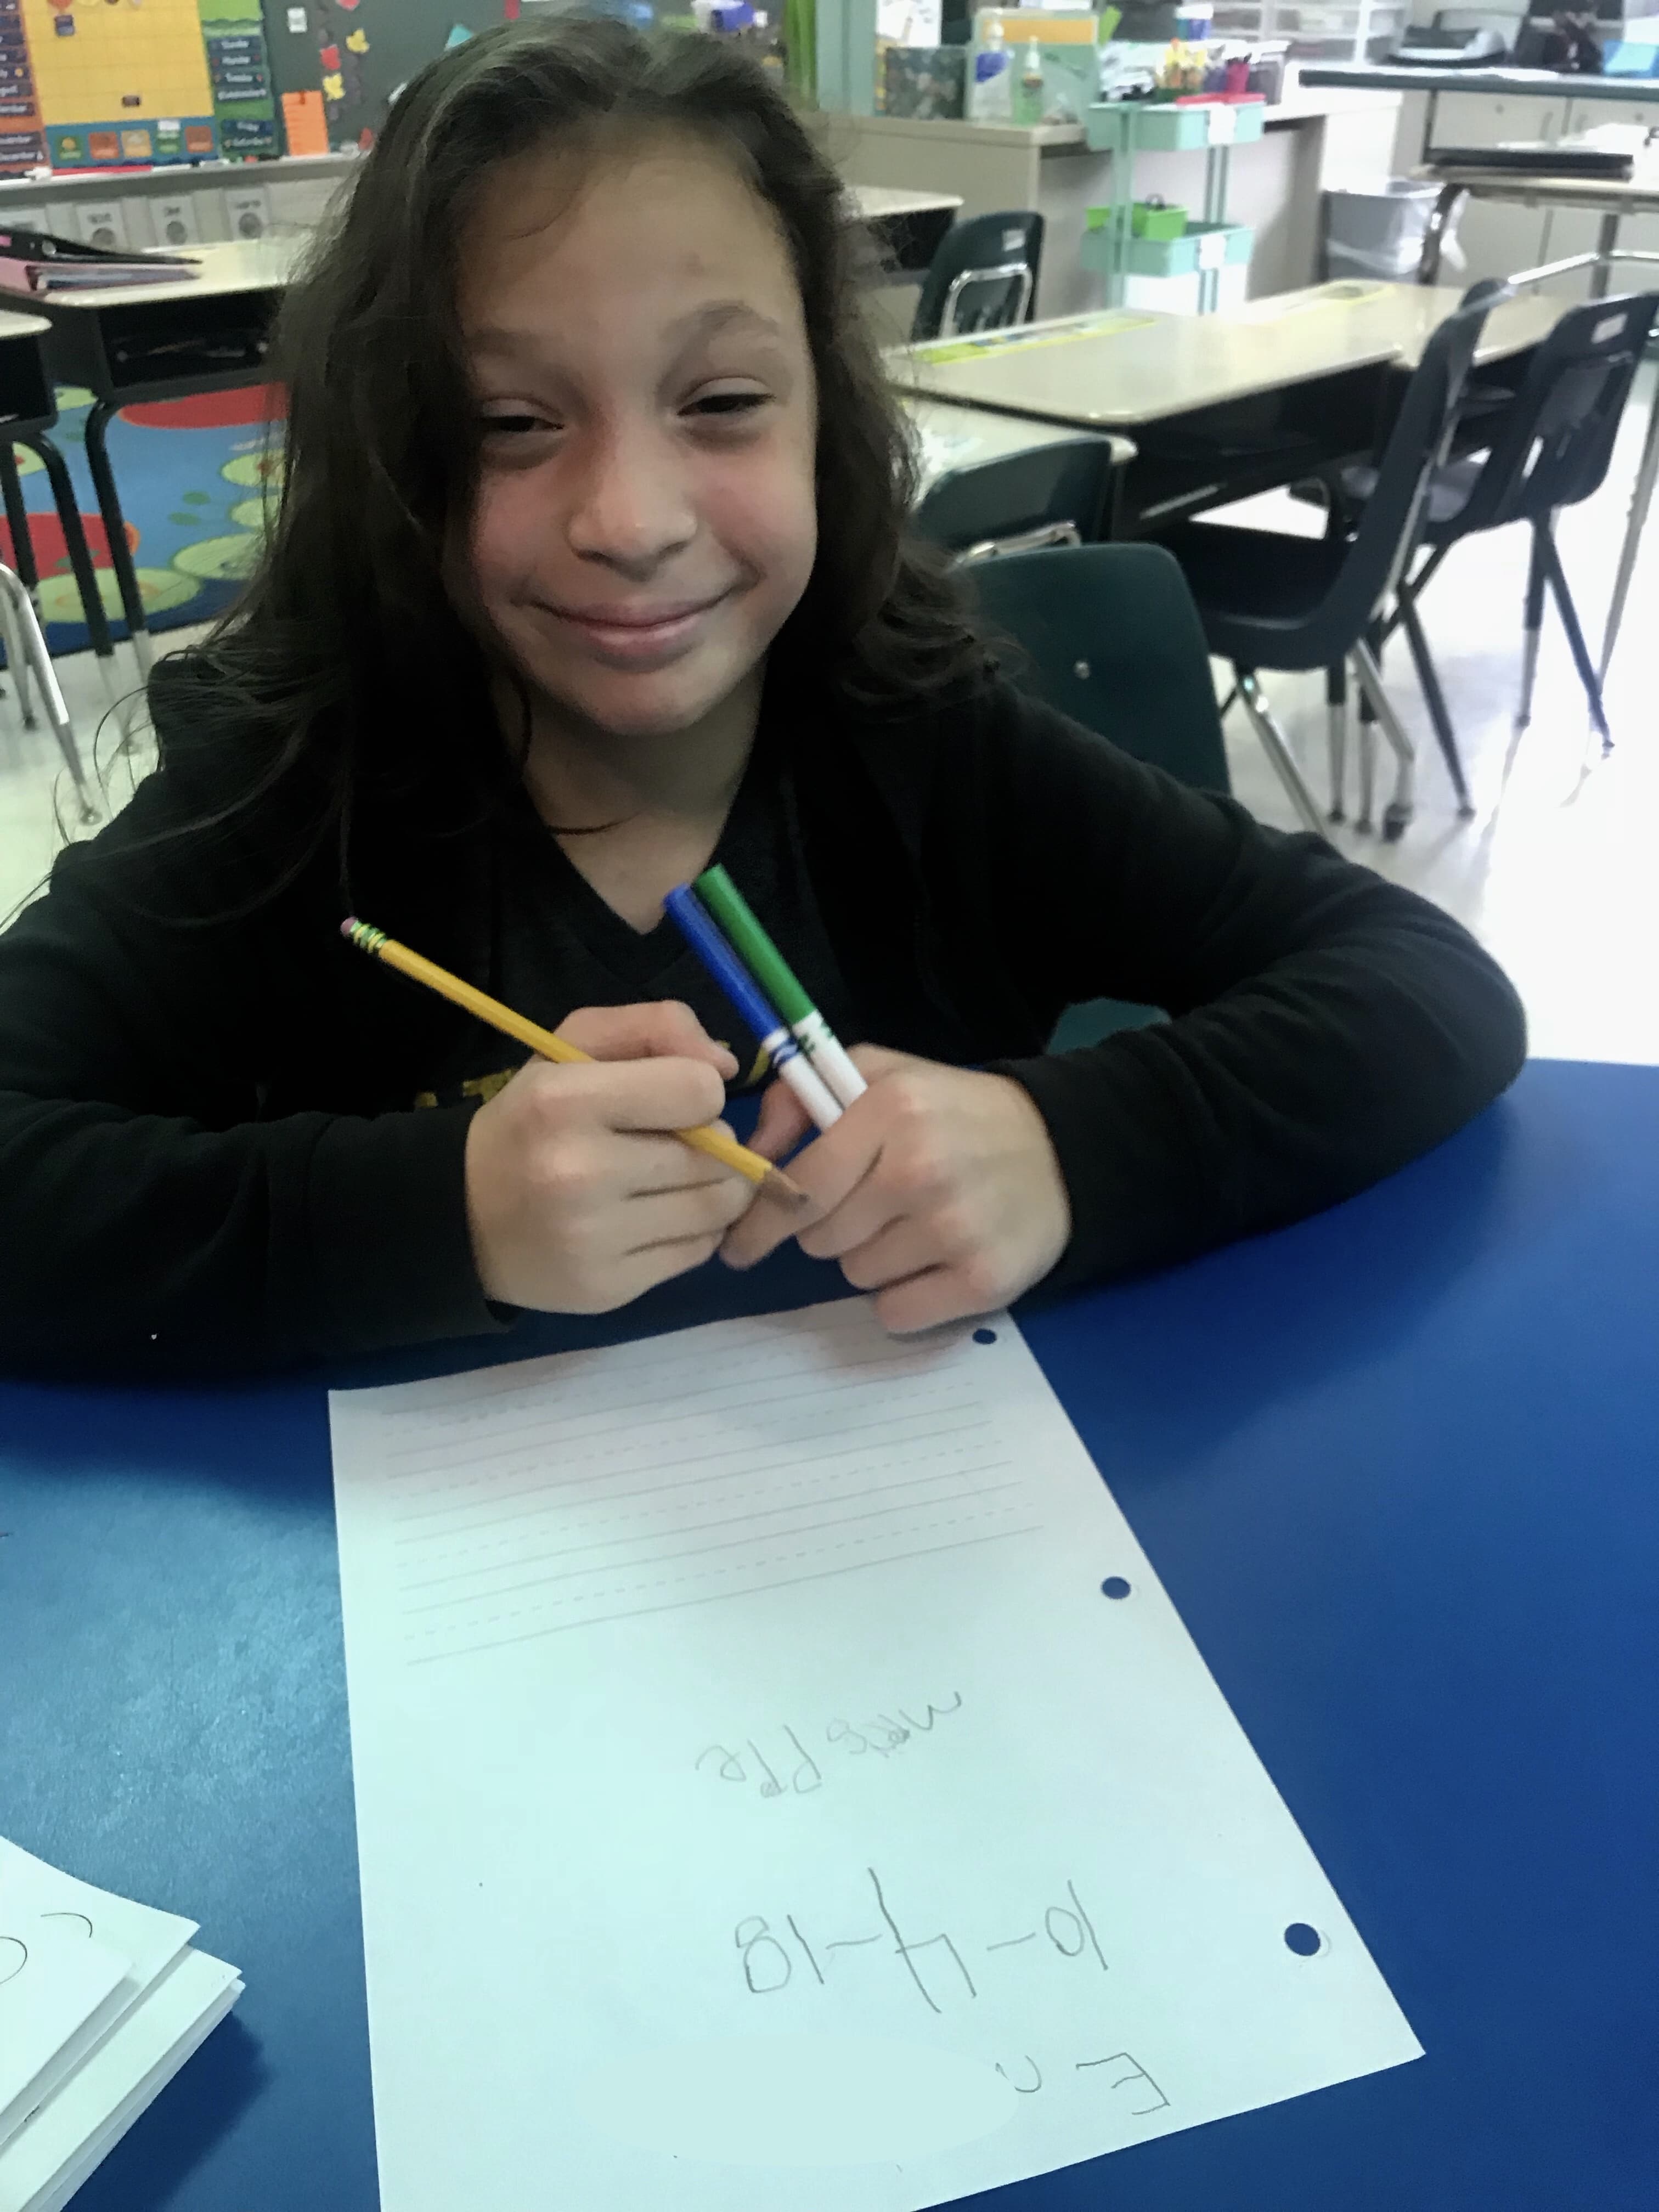 Student writing and smiling at the camera